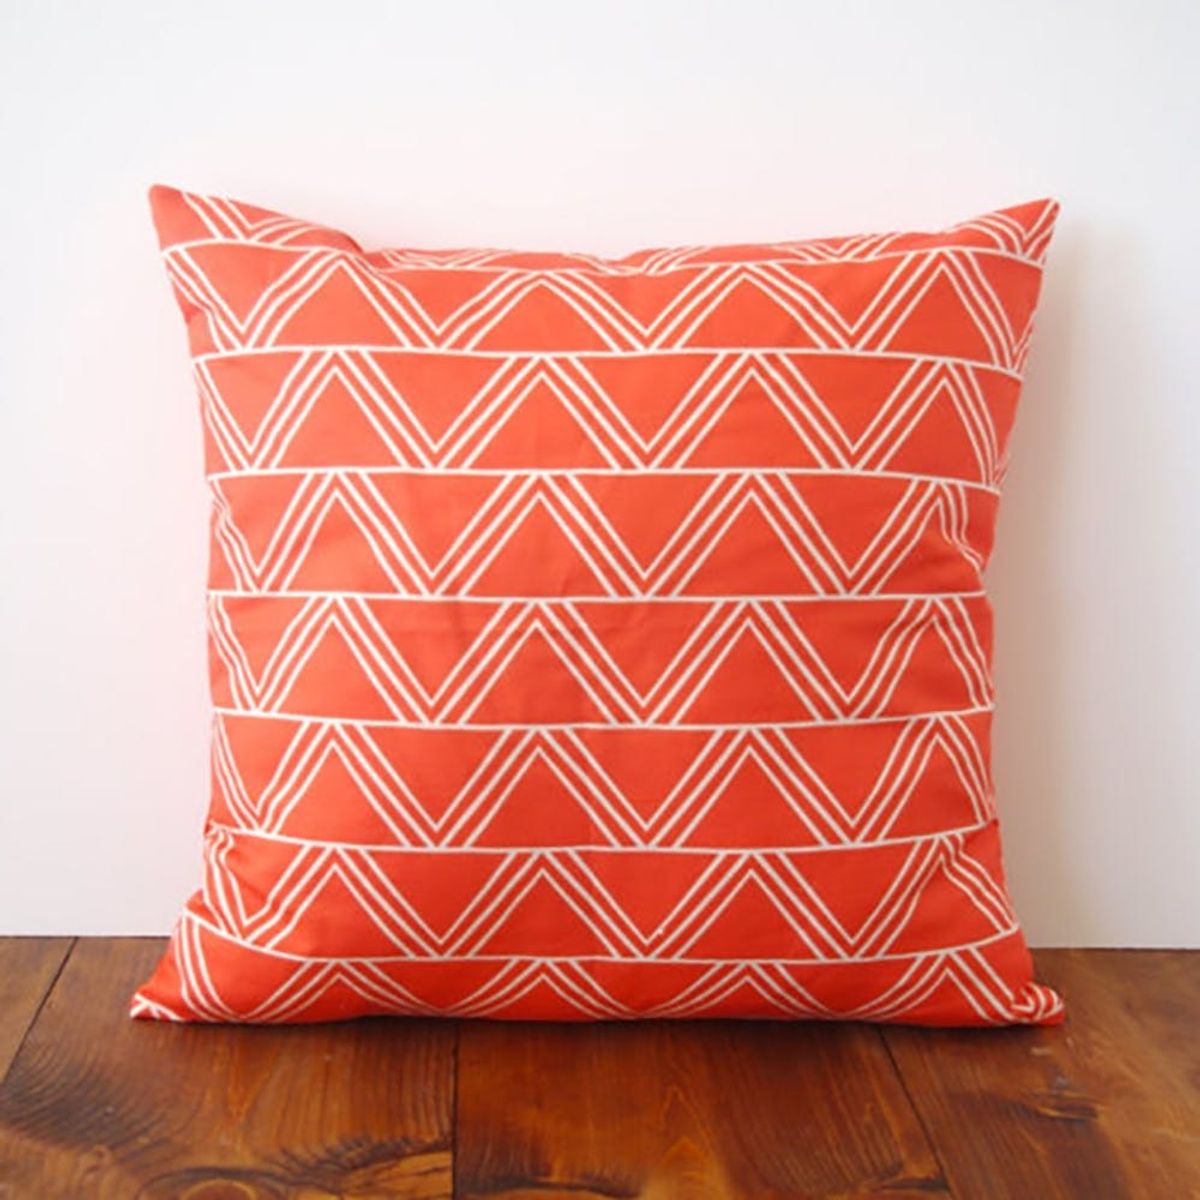 10 Pretty Pillows to Punch Up Your Sofa